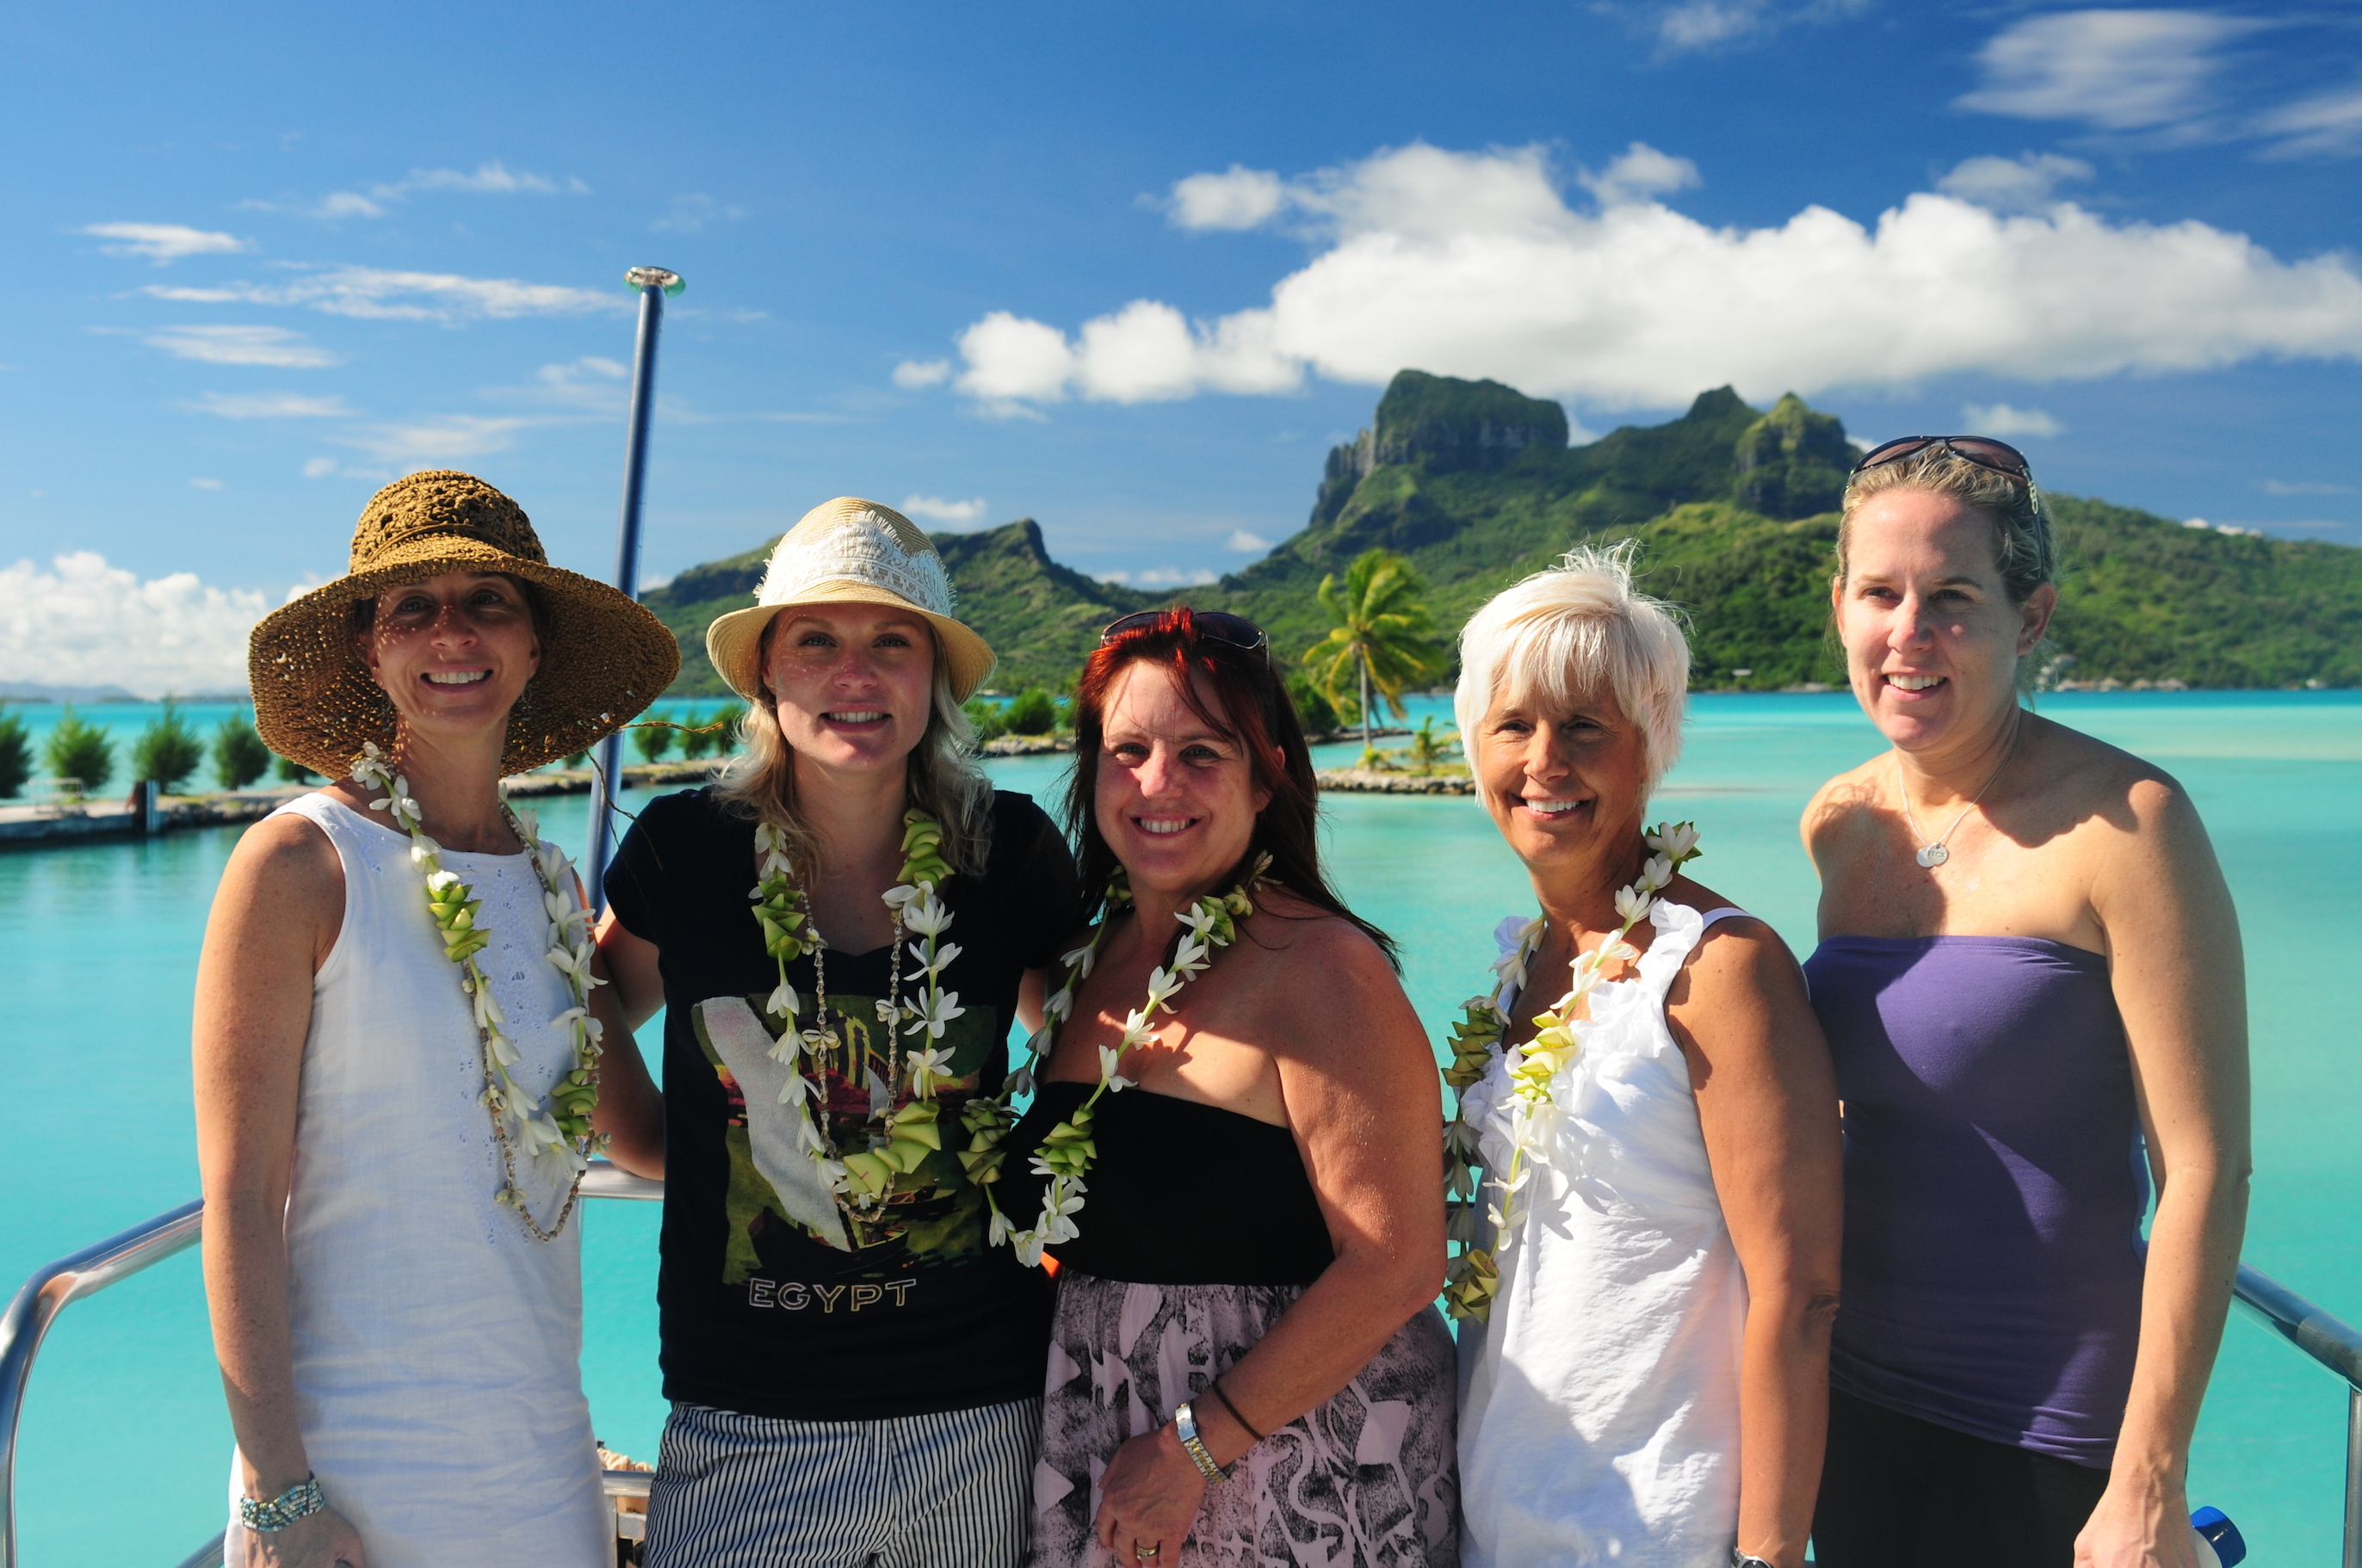 Over 25 years, South Seas Adventures has remained a thriving business because of their expertise and the relationships they've maintained with their clients and the resorts they work with.